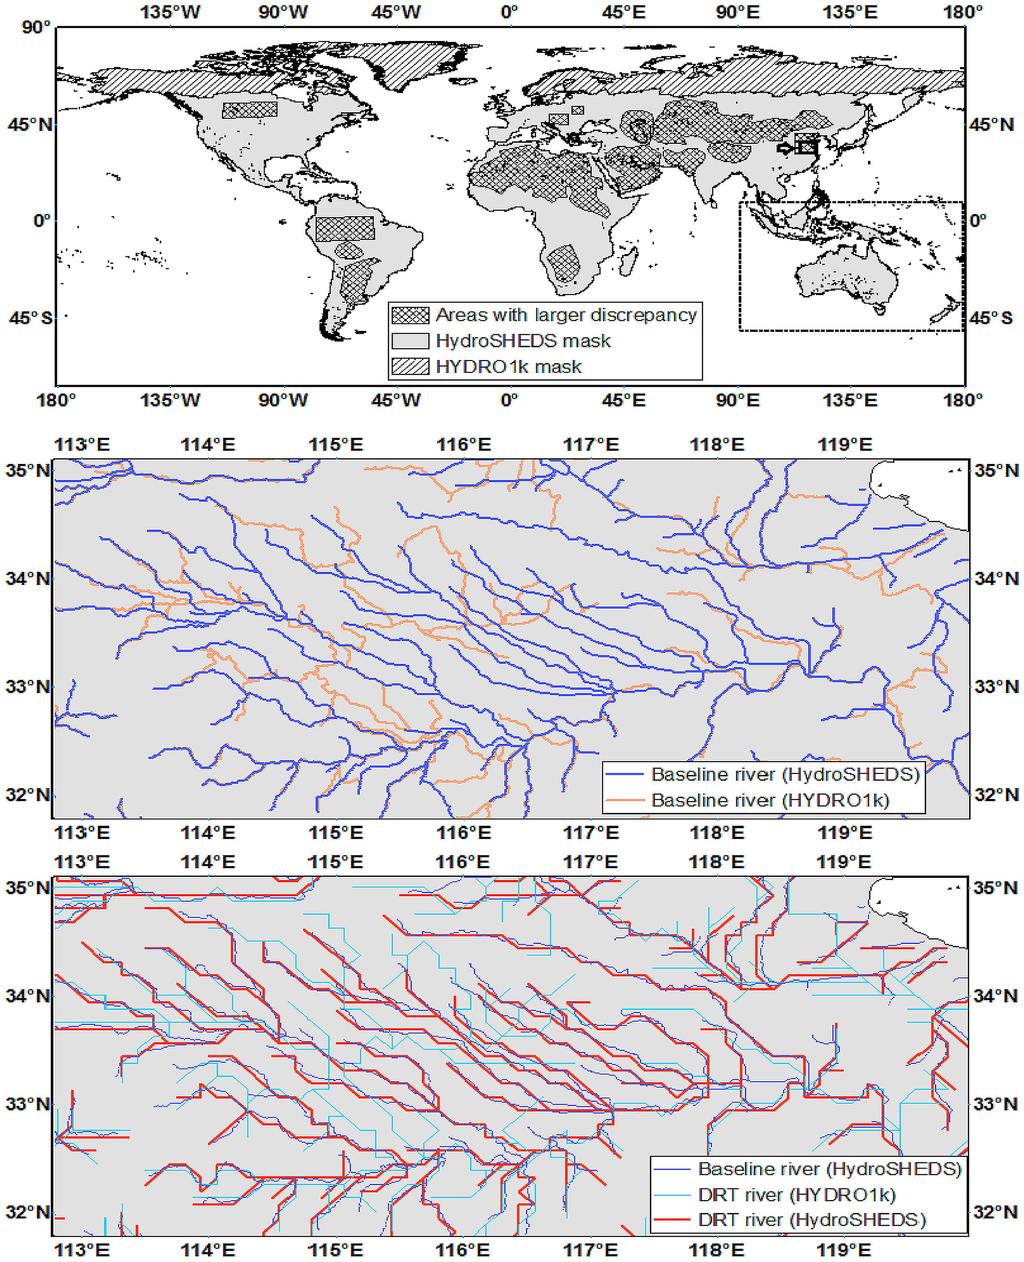 WU ET AL.: DATA AND ANALYSIS NOTE Figure 1. (top) The global study domain showing boundaries between HYDRO1k and HydroSHEDS areas.